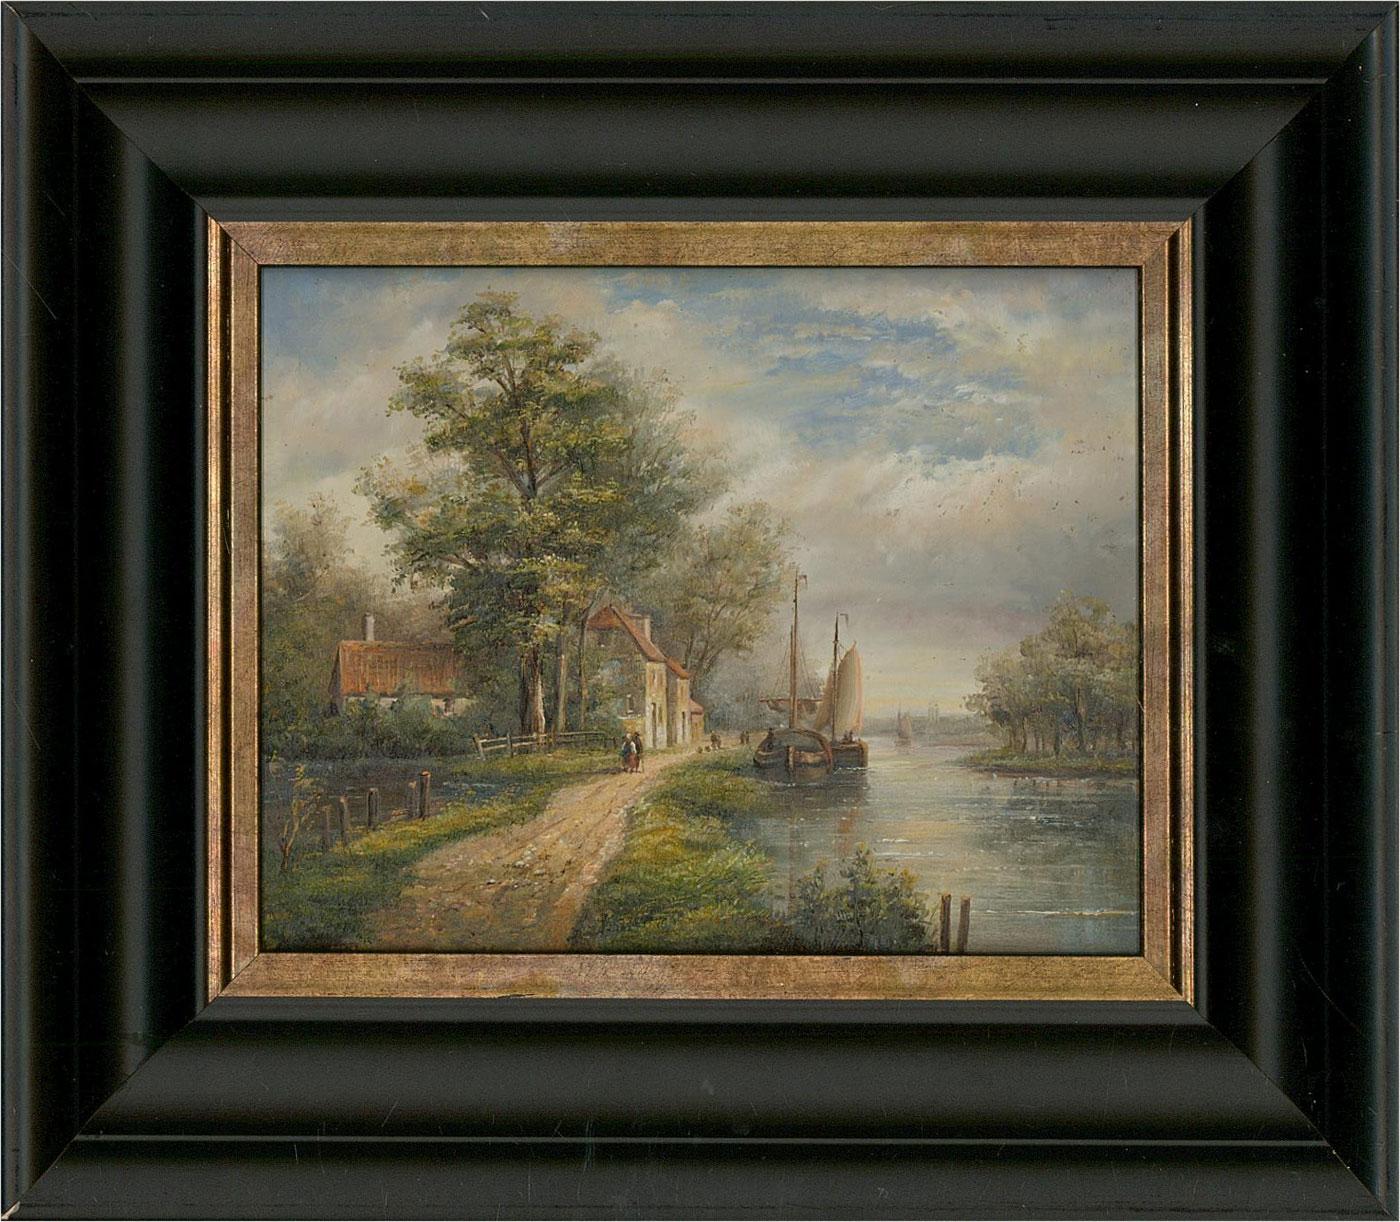 A charming oil showing some figures walking through a village via the river path past the boats moored up on the edge. Well presented in a modern black frame with gilt trim.
On board.